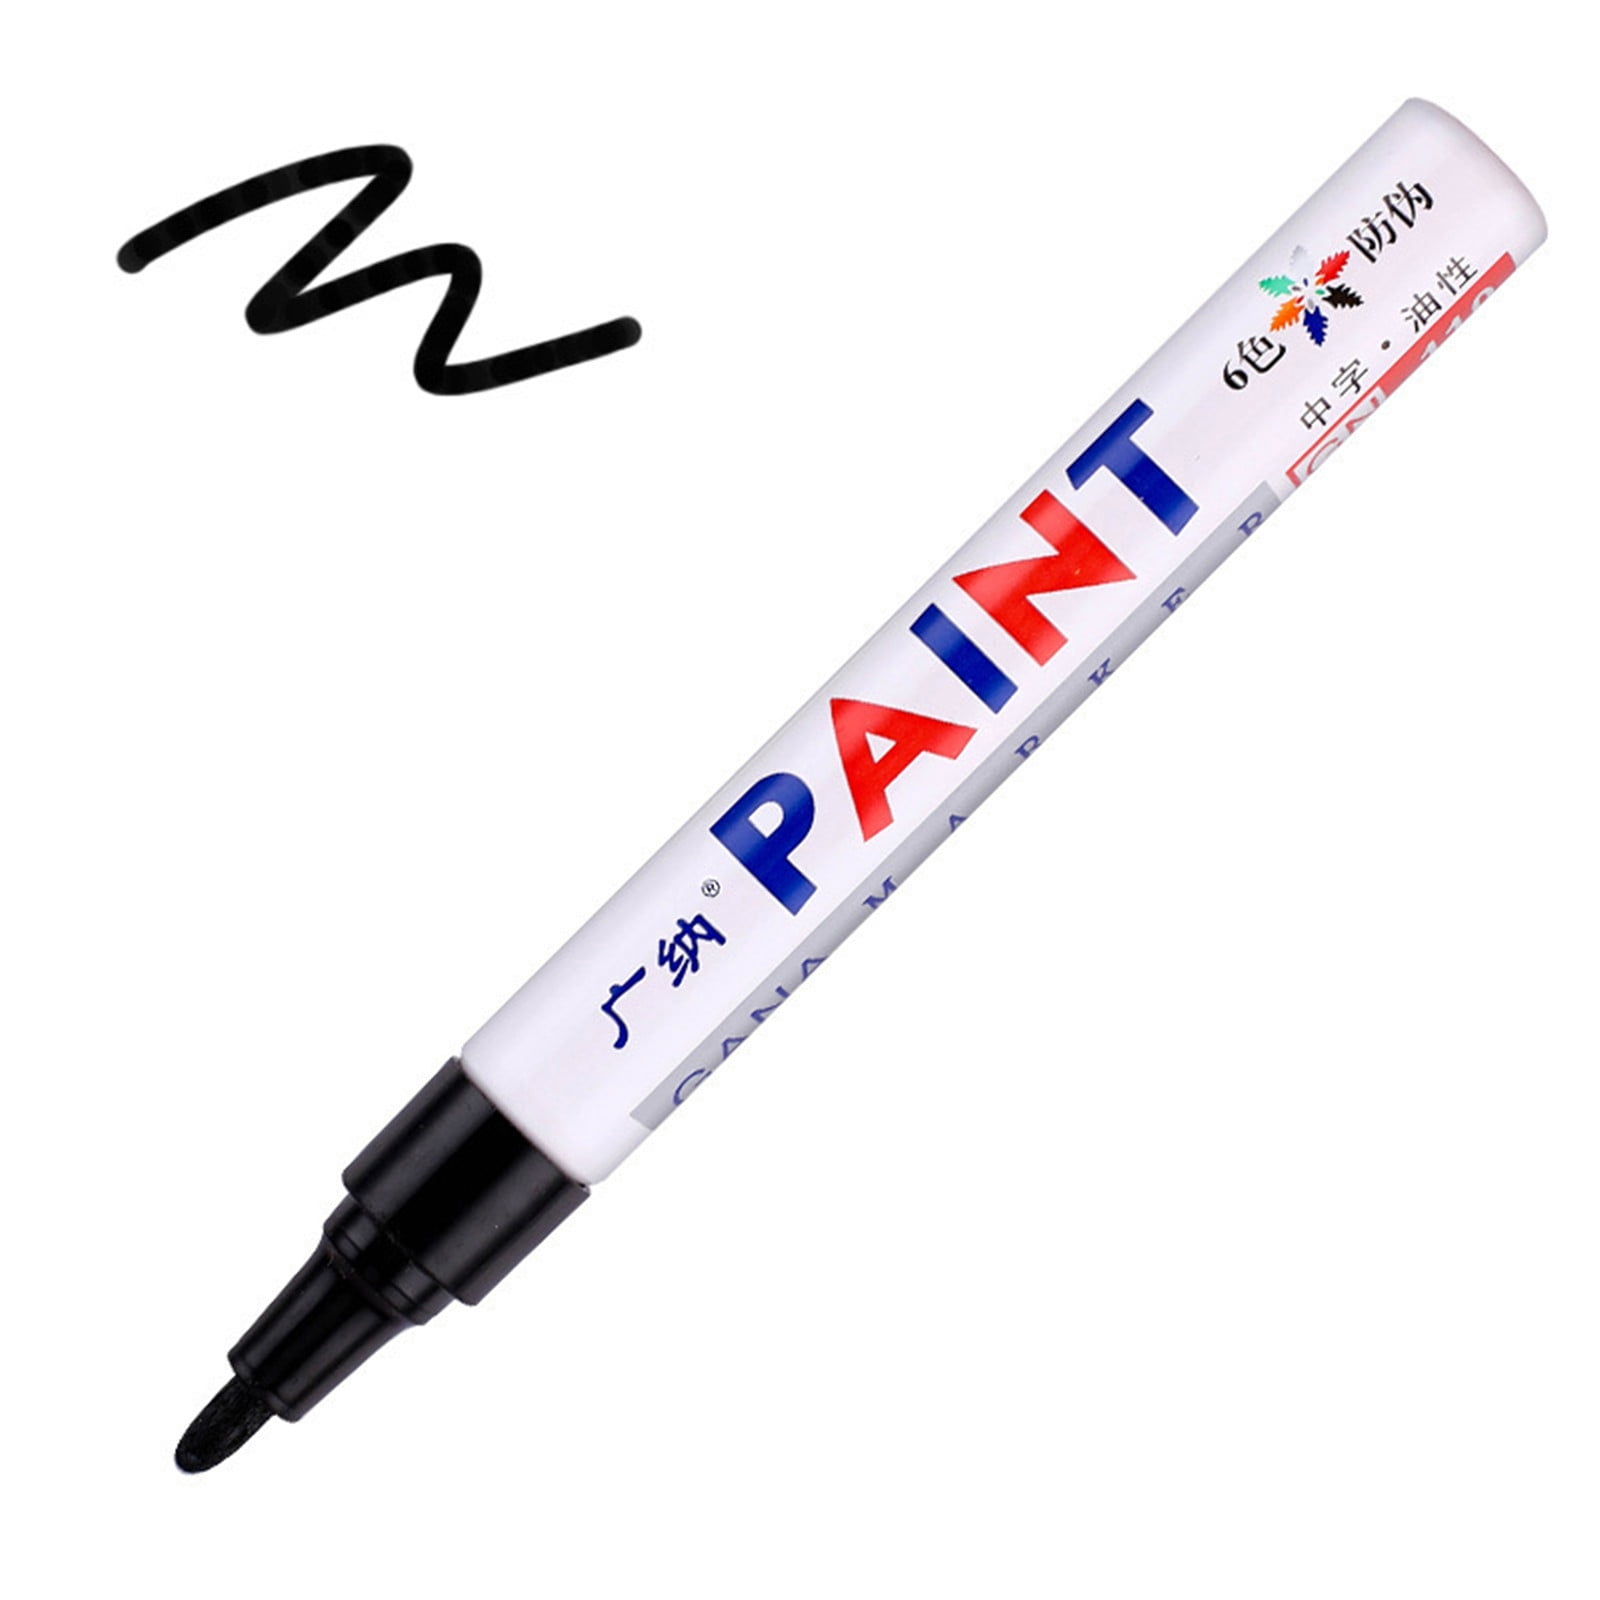 Tire Ink | Paint Pen for Car Tires | Permanent and Waterproof | Carwash Safe | 8 Colors Available (1 Pen, Orange)